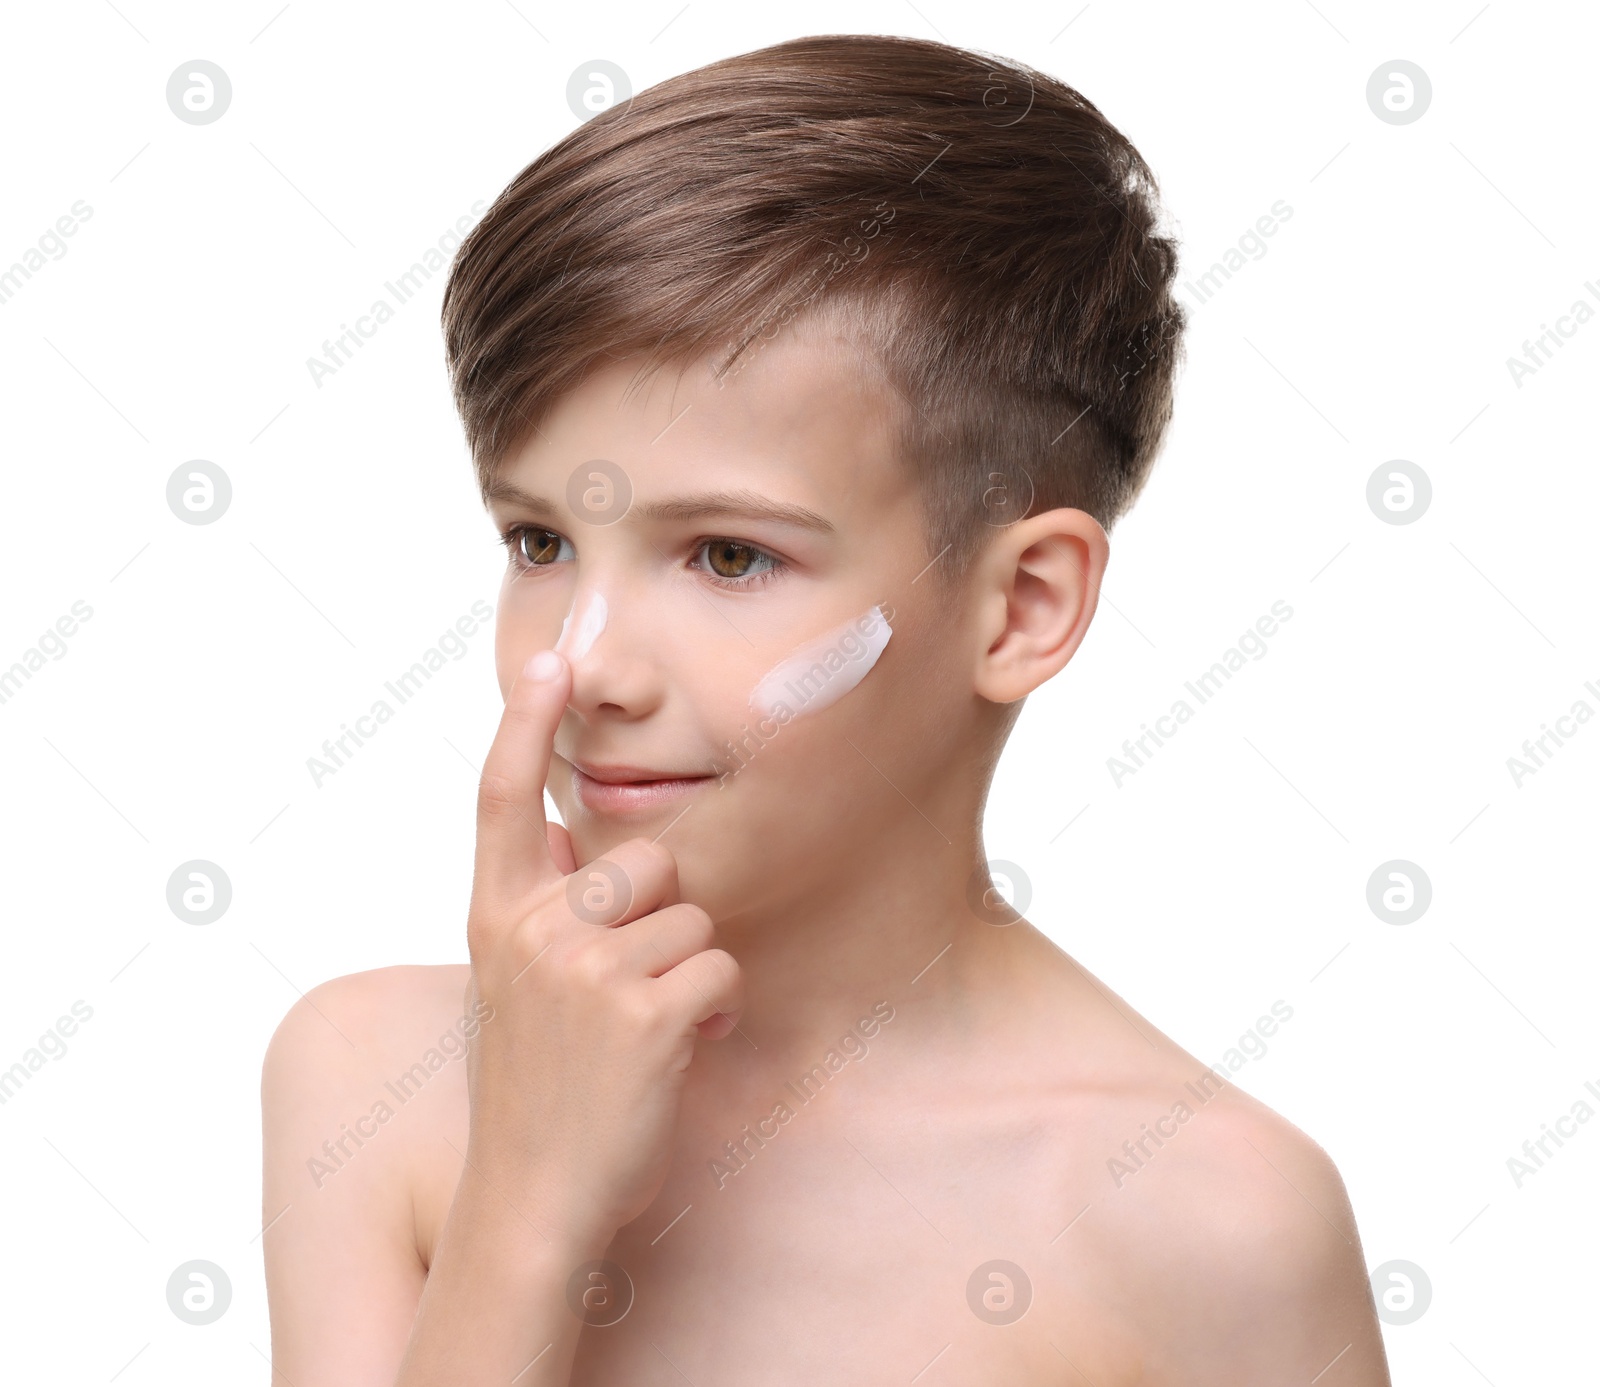 Photo of Smiling boy applying sun protection cream onto his face against white background